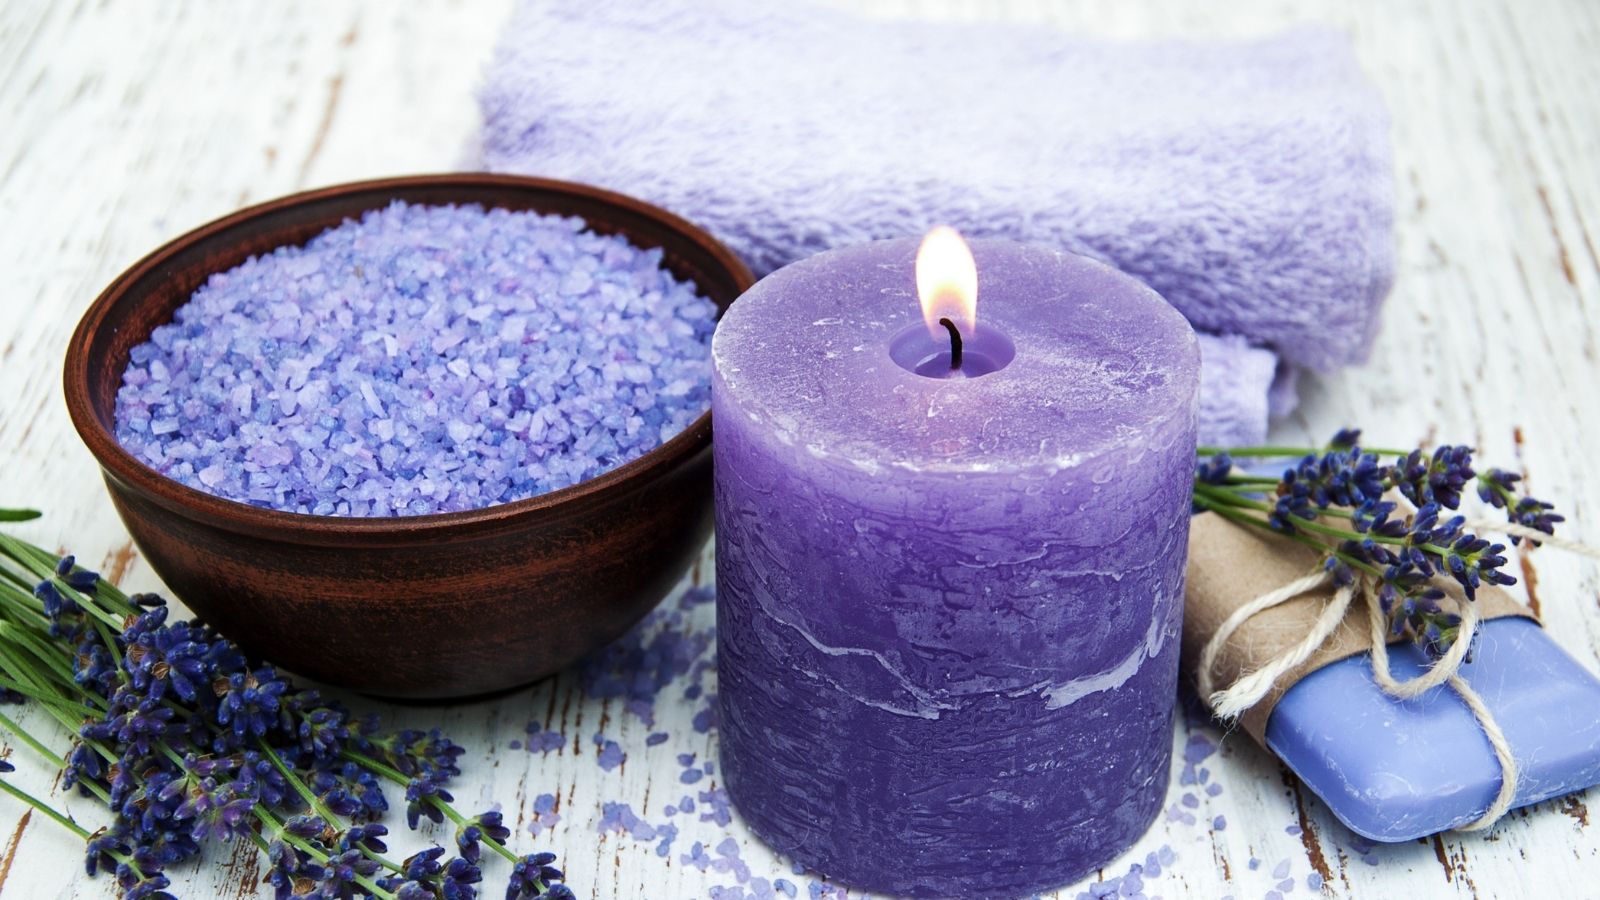 Lavender is known to have benefits for sleep